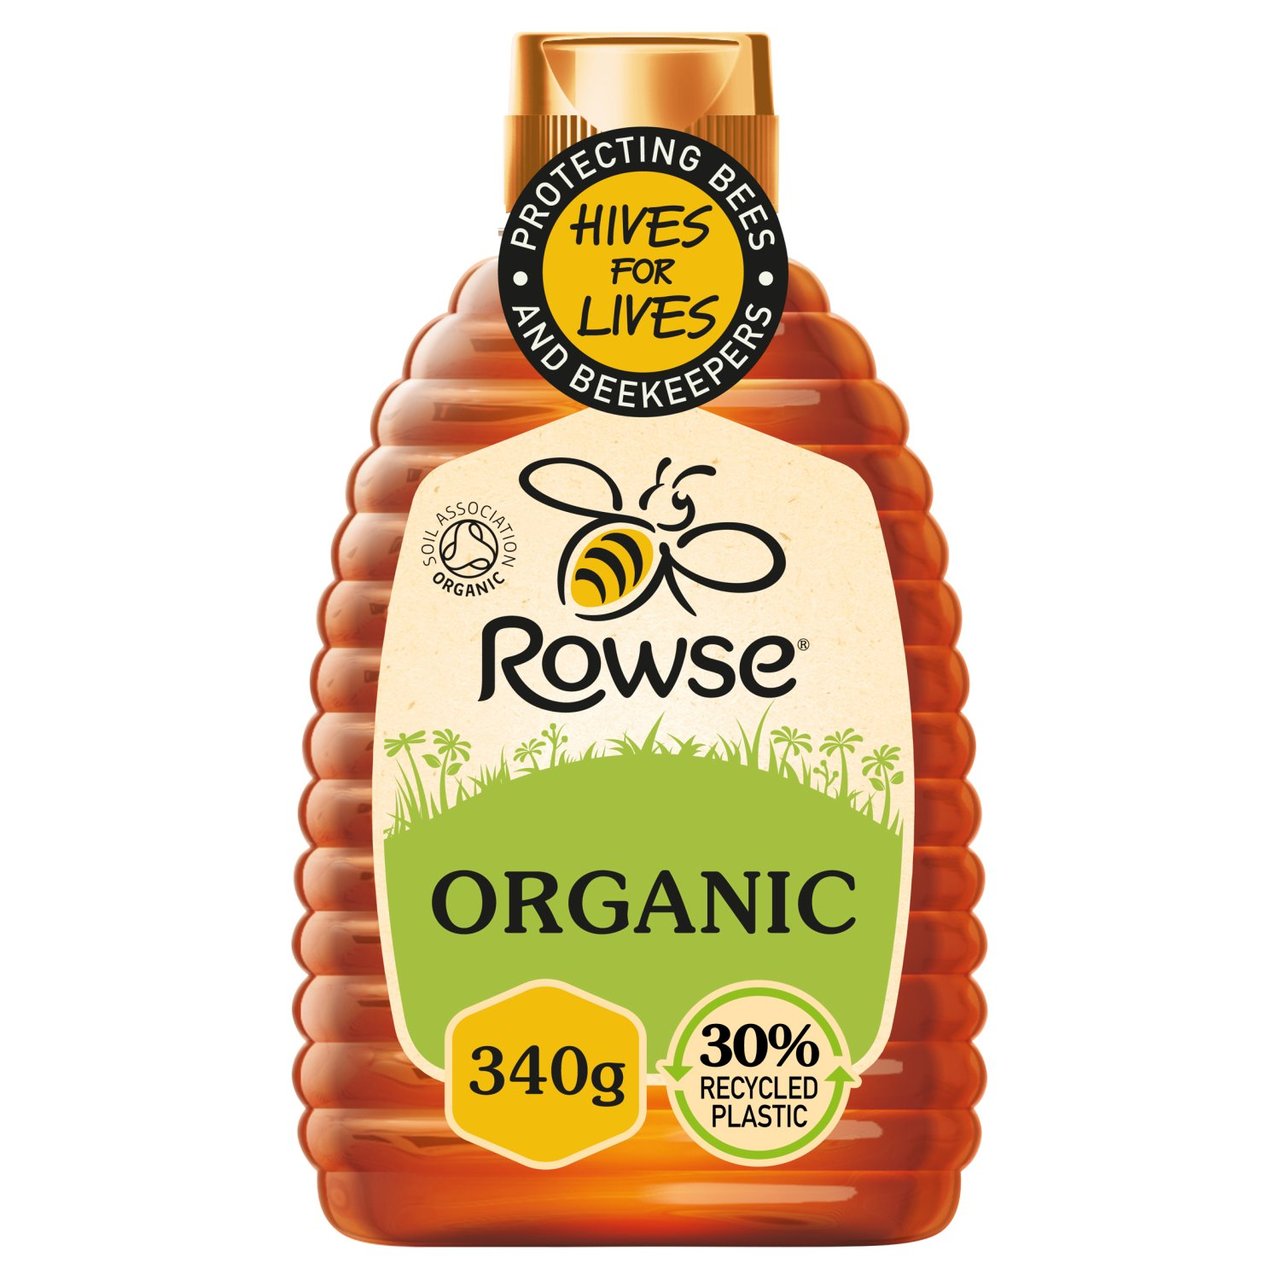 Organic Squeezable Rowse Honey 340g